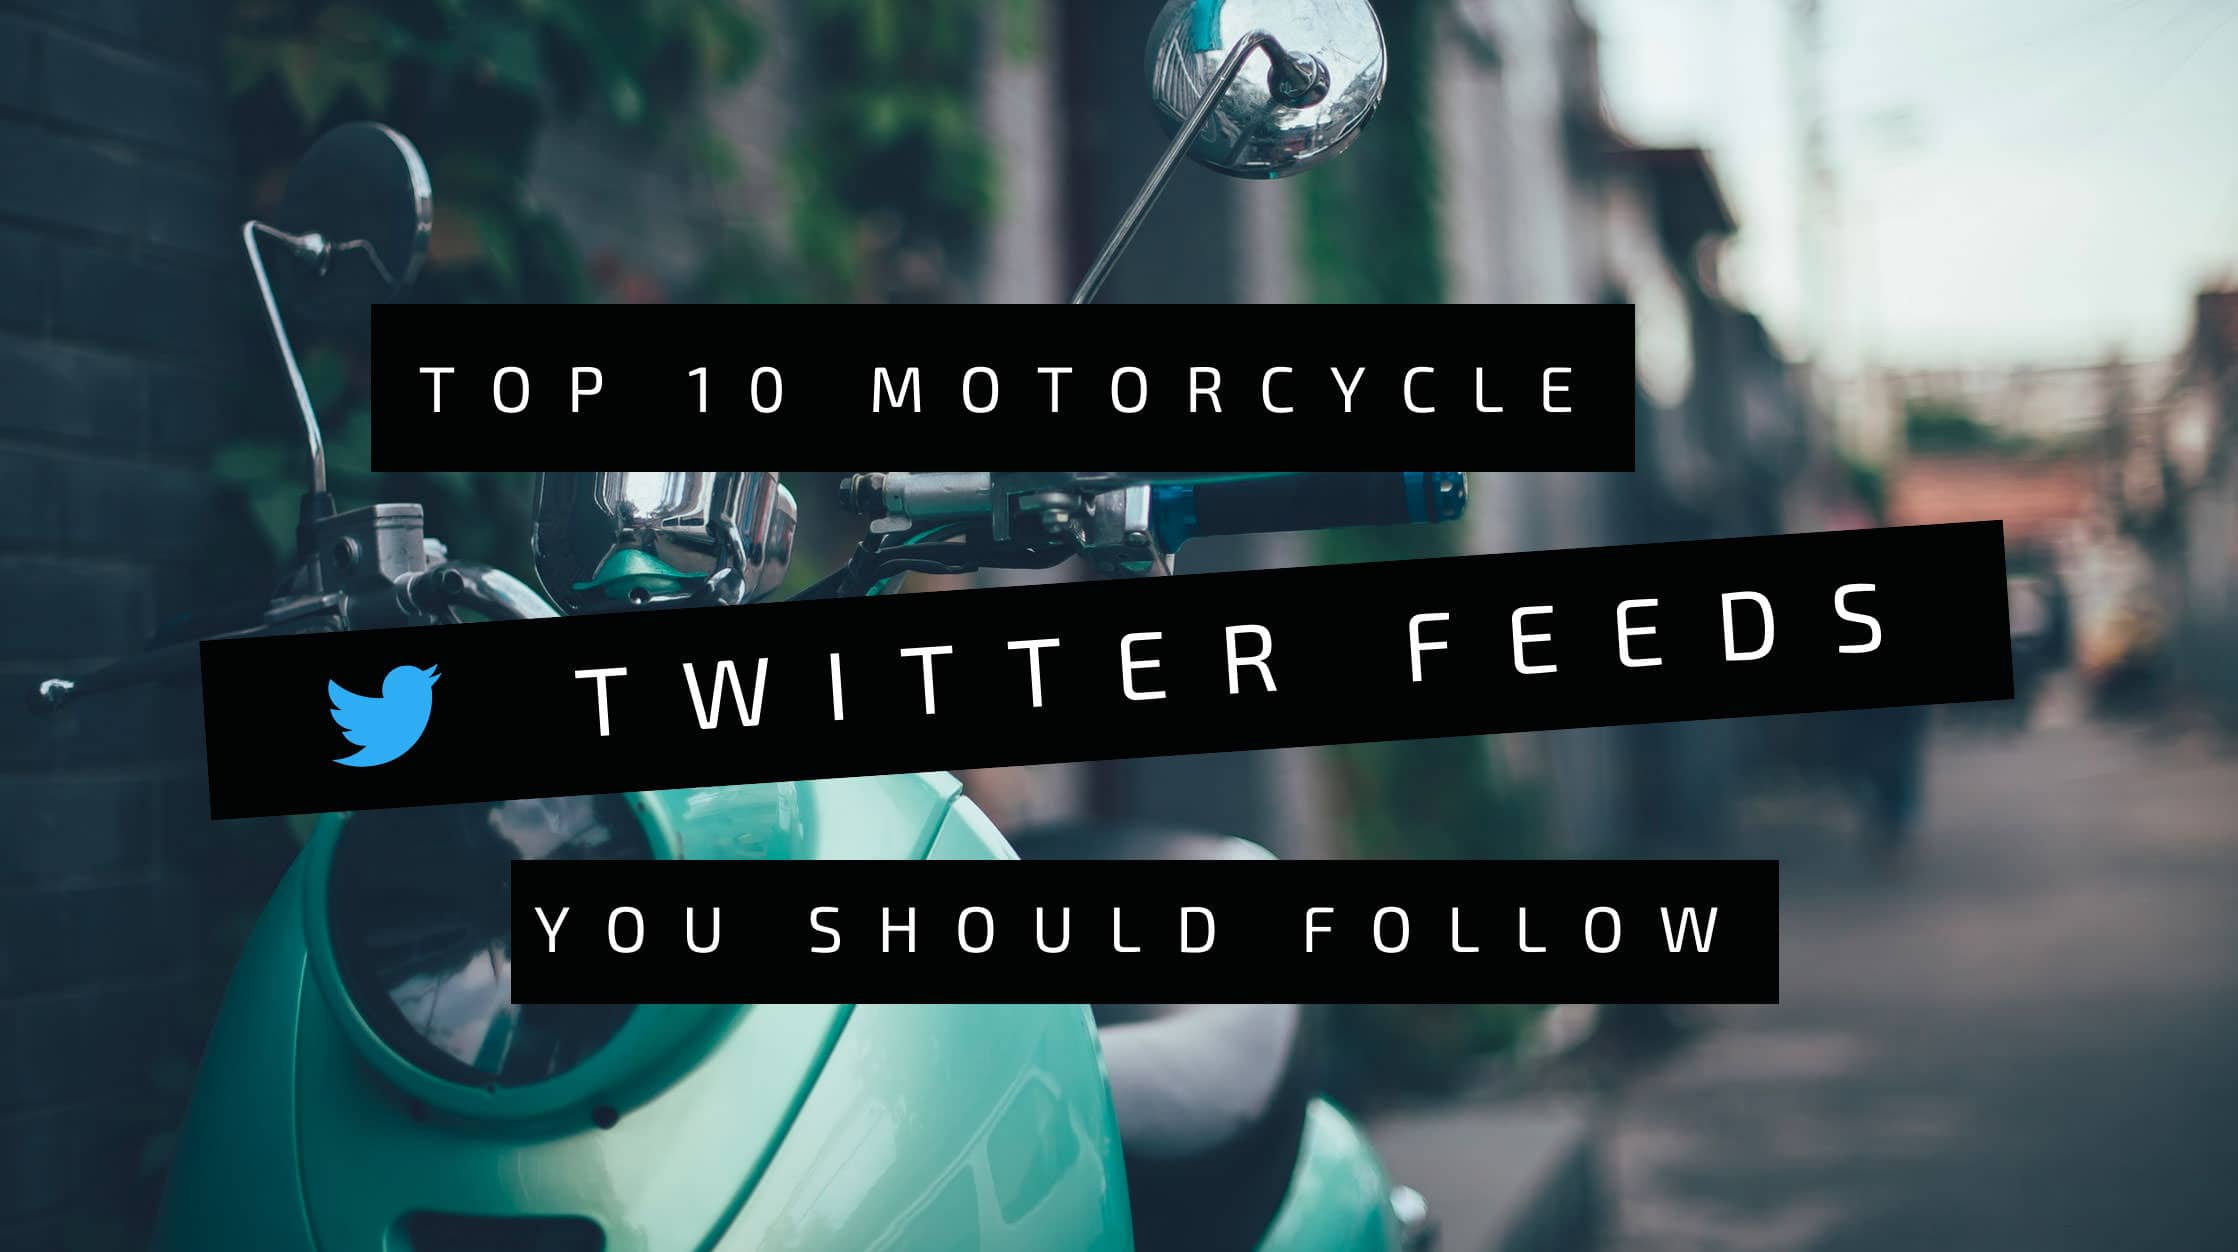 Top 5 Motorcycle Twitter Feeds You Should Follow in 2023